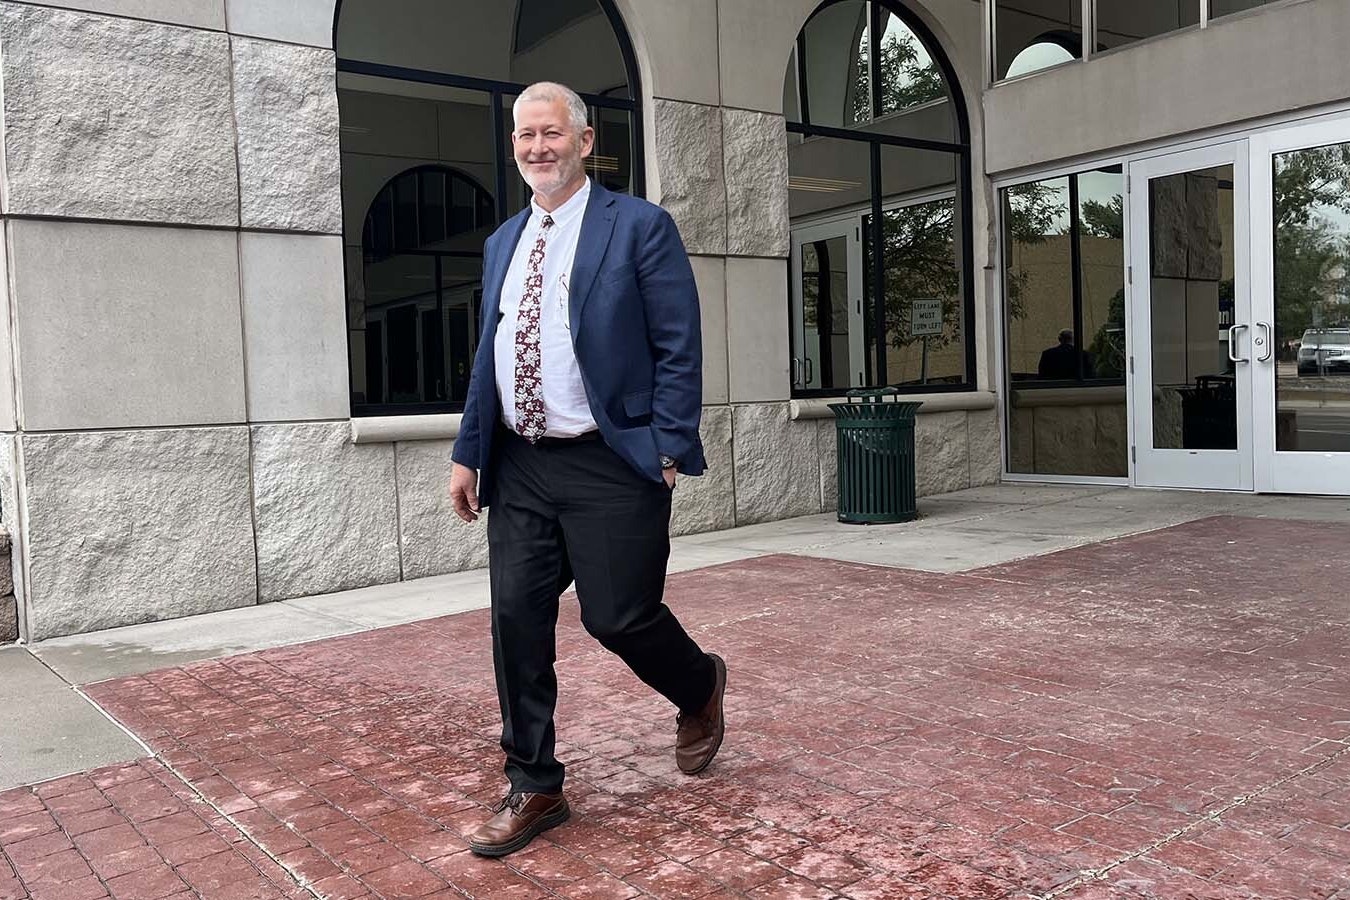 Former Wyoming Superintendent of Public Instruction Brian Schroeder walks out of the Laramie County courthouse and government complex in downtown Cheyenne on Thursday.